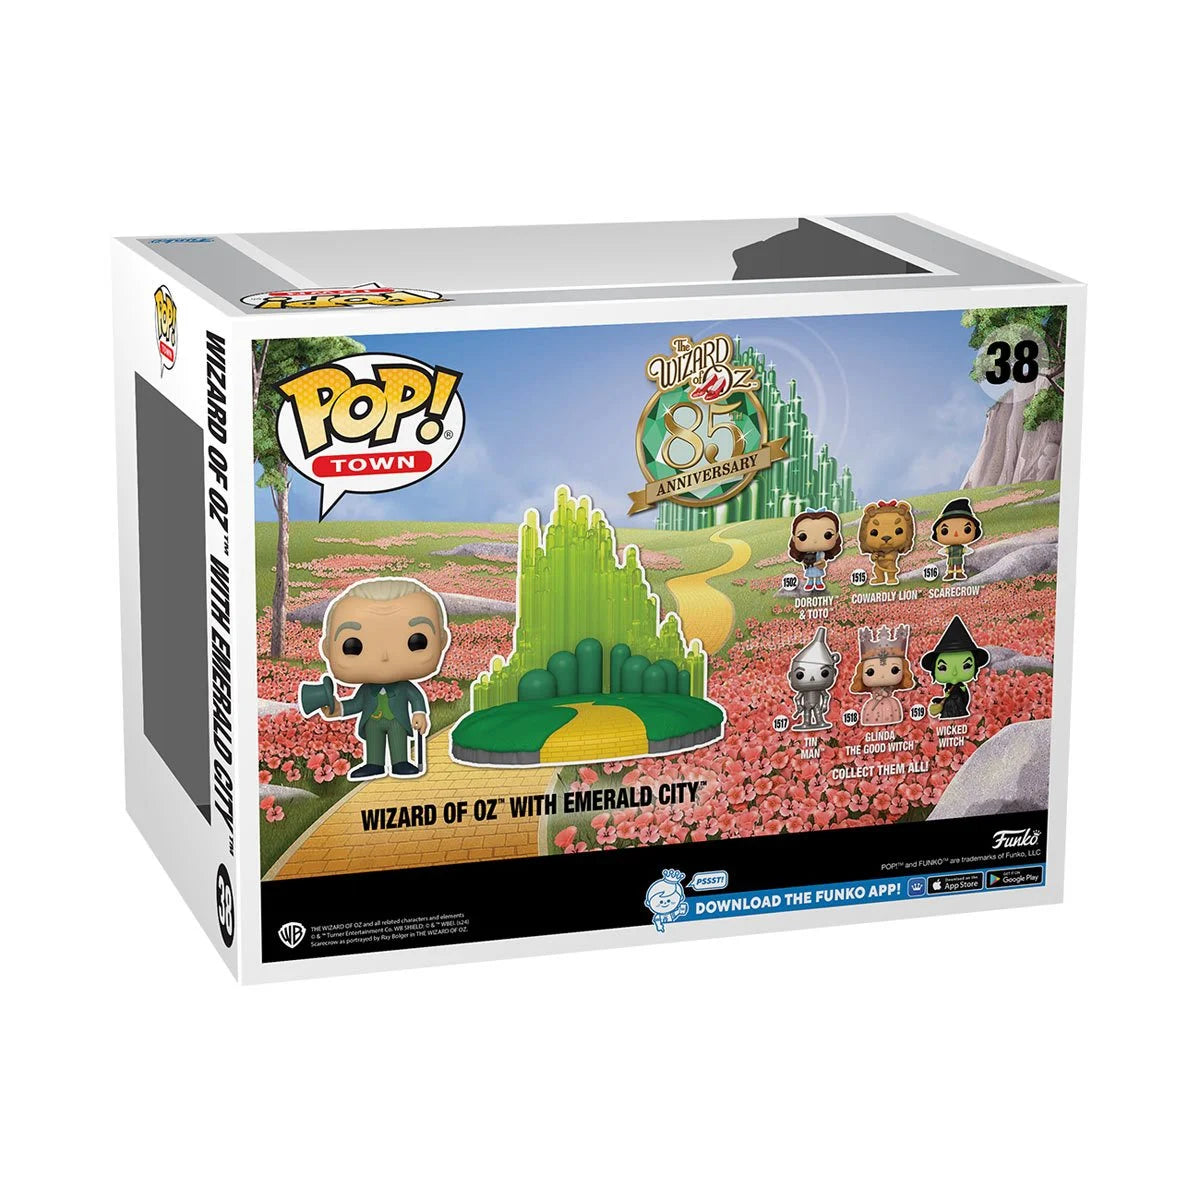 Funko Pop! The Wizard of Oz 85th Anniversary Wizard of Oz with Emerald City Town #38